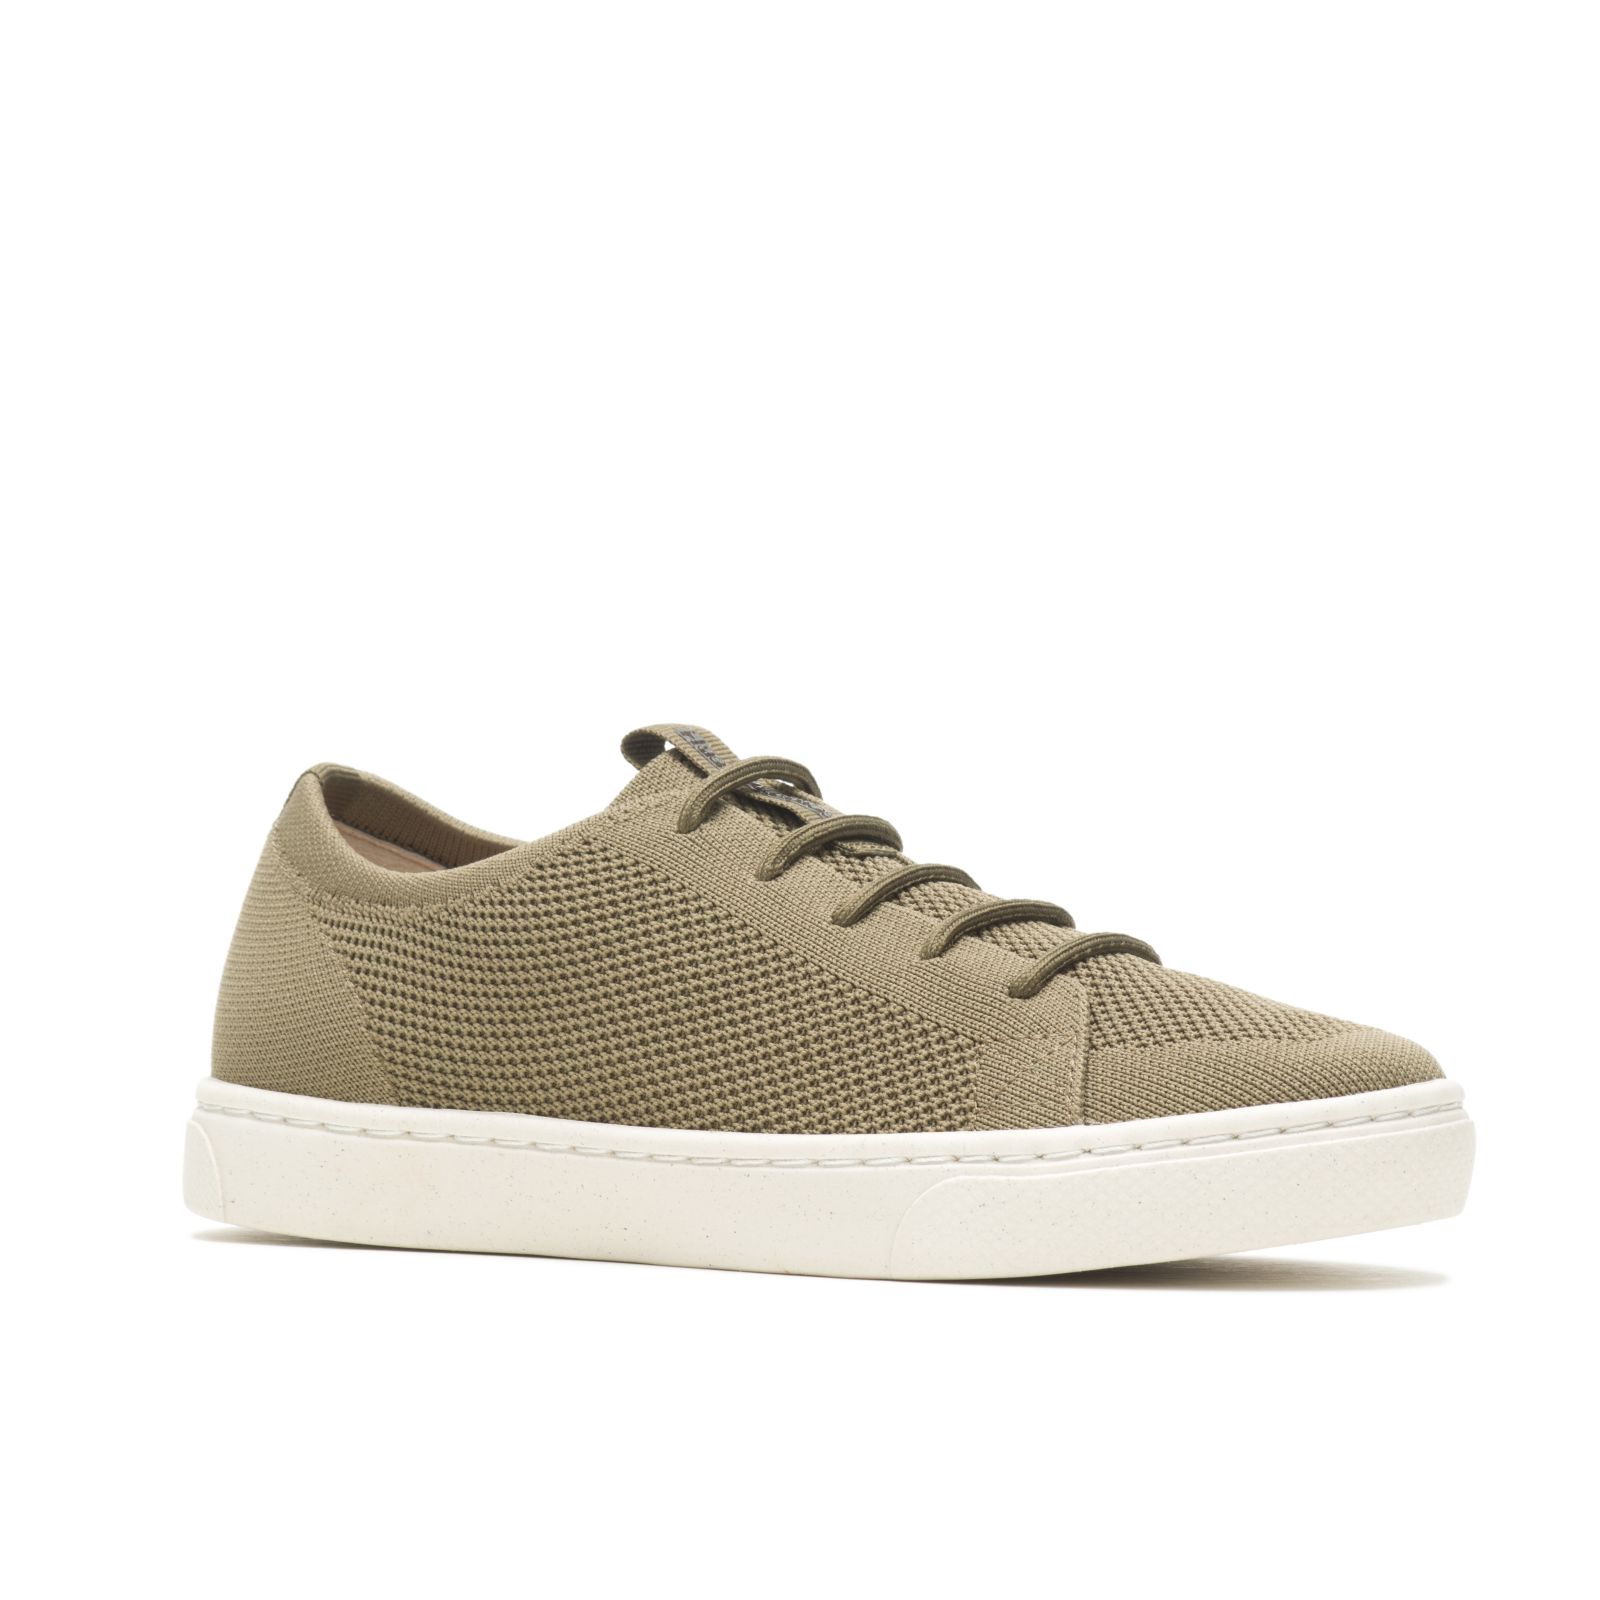 Tenis Hush Puppies The Good Low Top Mujer Verde Oliva | VEAOPDS-94